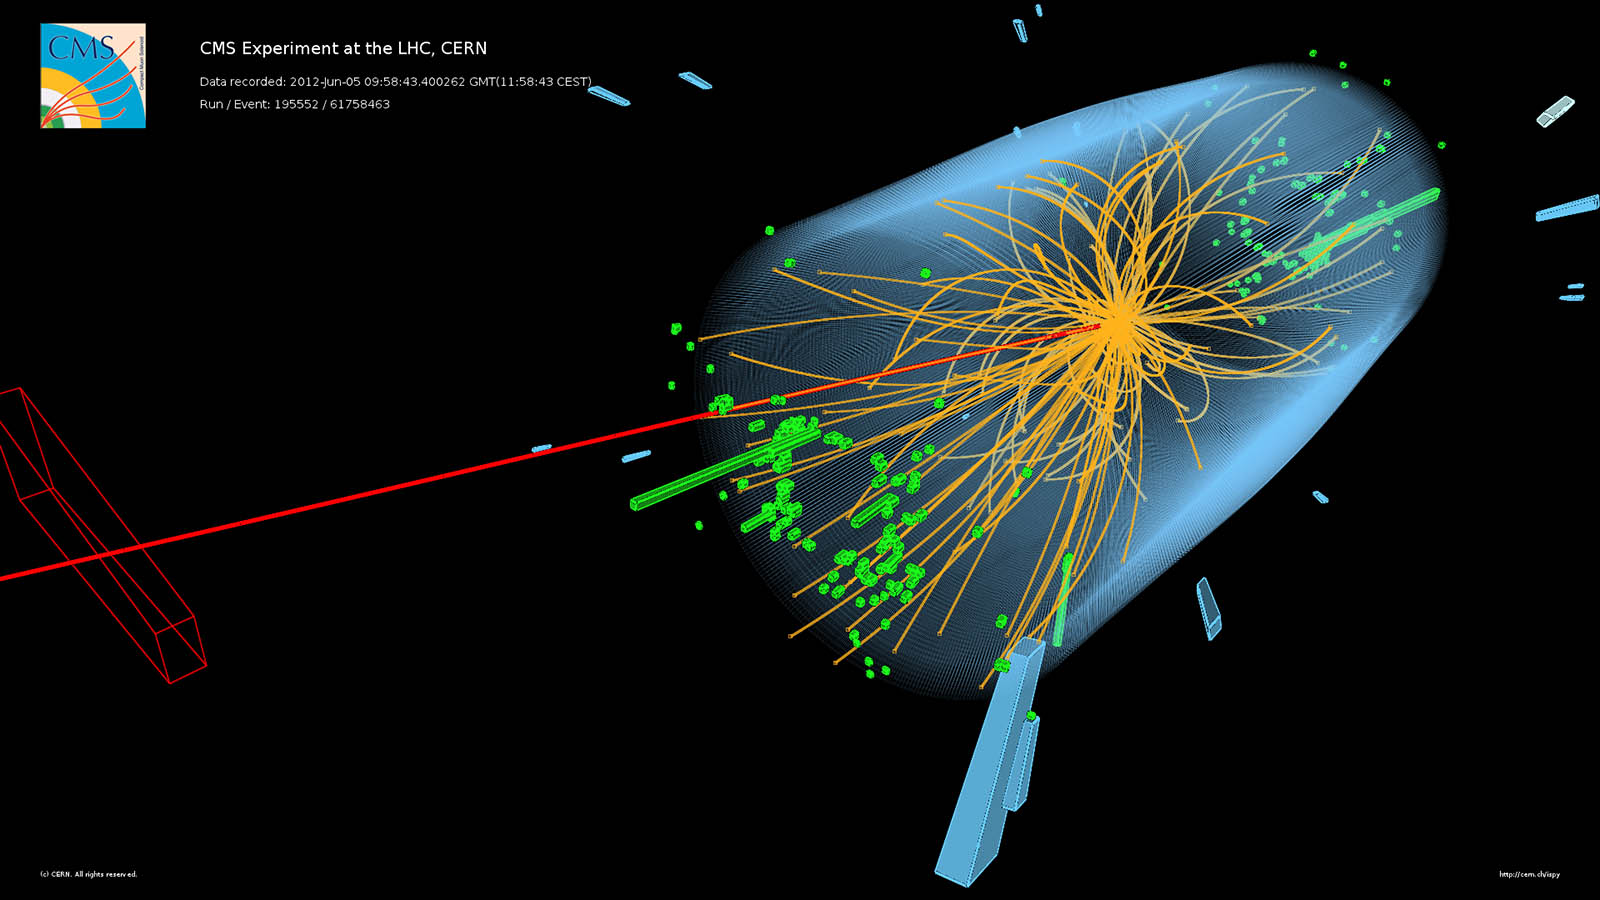 European Organization for Nuclear Research (CERN), Large Hadron Collider, Higgs Boson, 2011